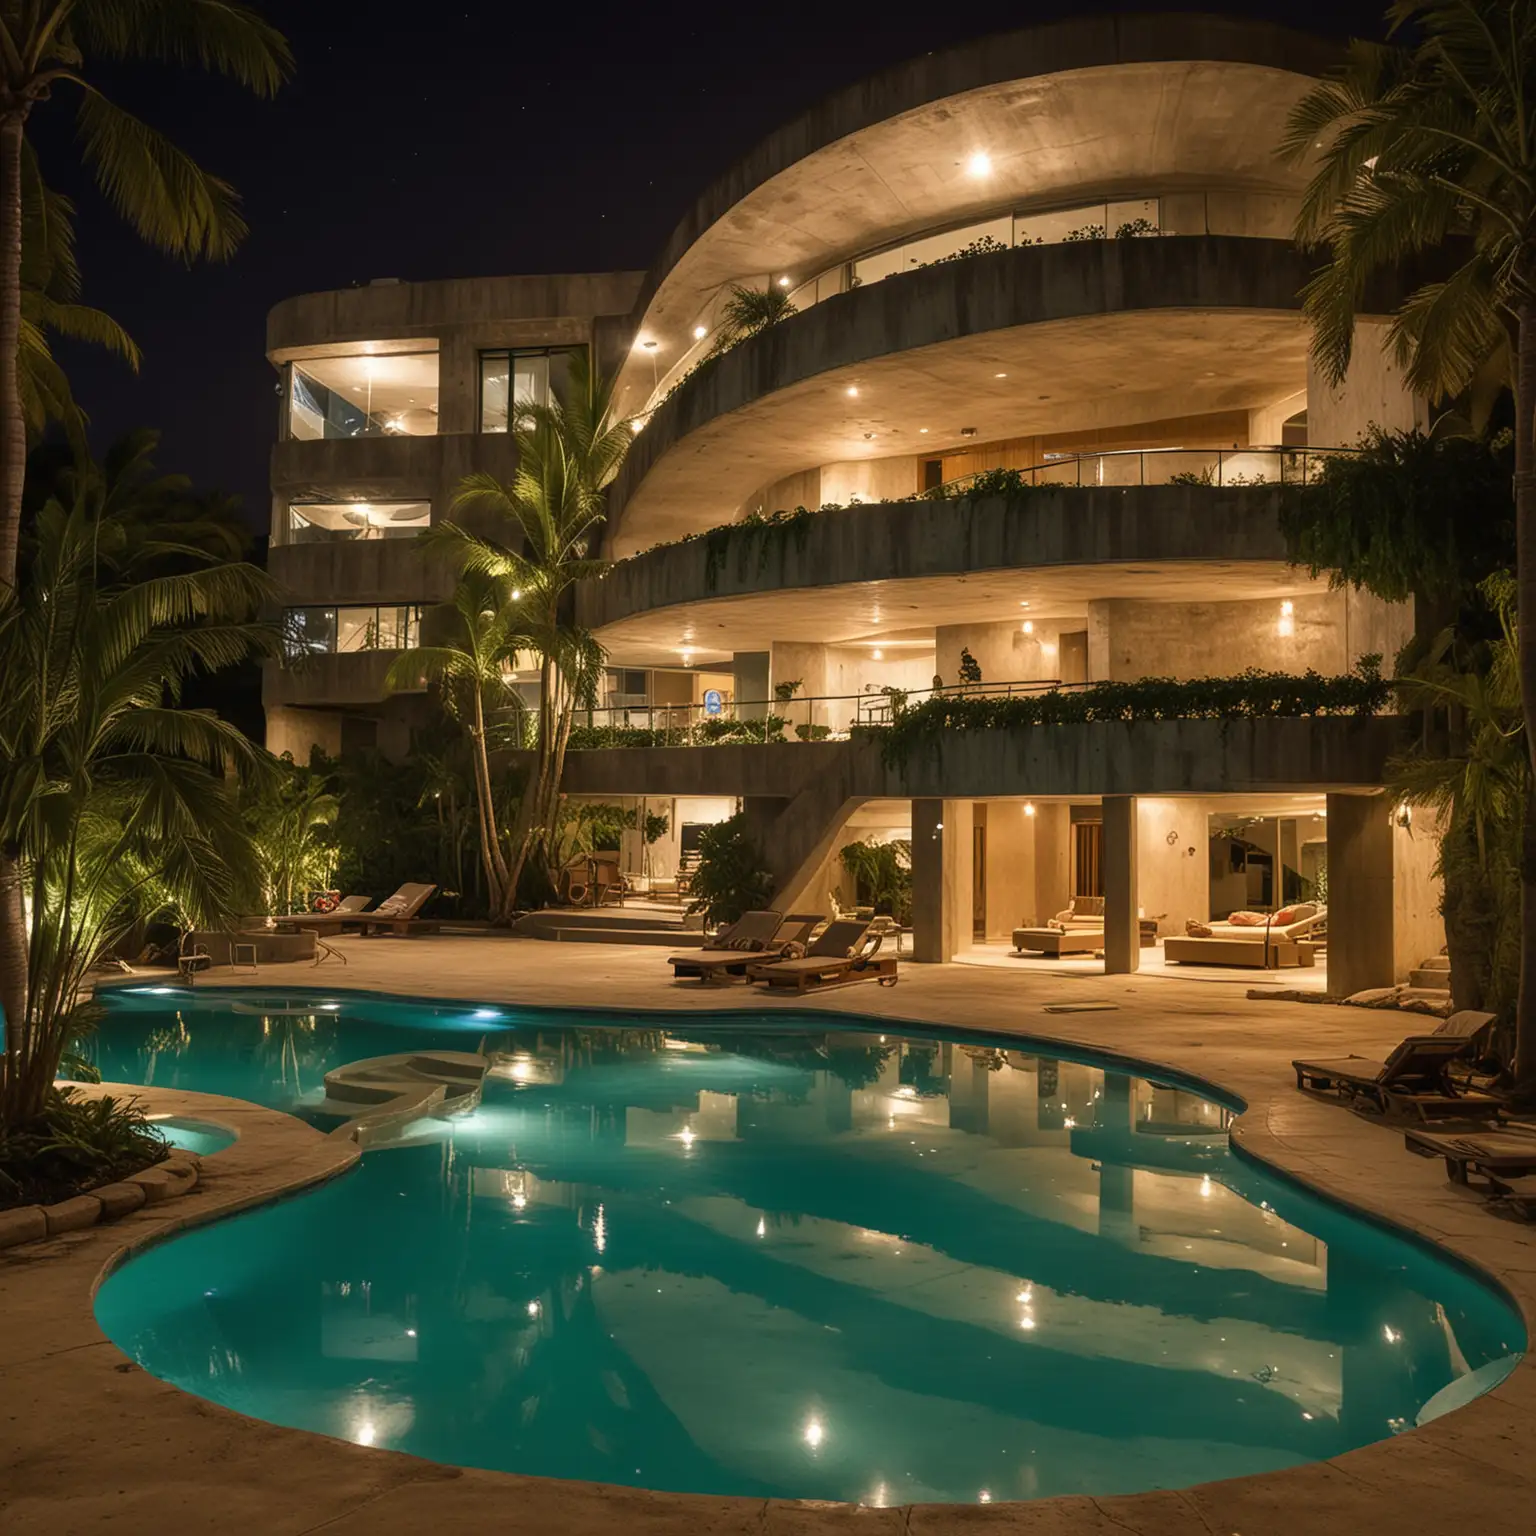 a very handsome 16 year old Mexican boy in a curved concrete nightclub has an underground parking lot, 3 pools (tiered pools from the higher level in the east to the lower level pool in the west), predominantly green, is a 3 story house with garden and pool. on a small sandy island beach. with lights at night